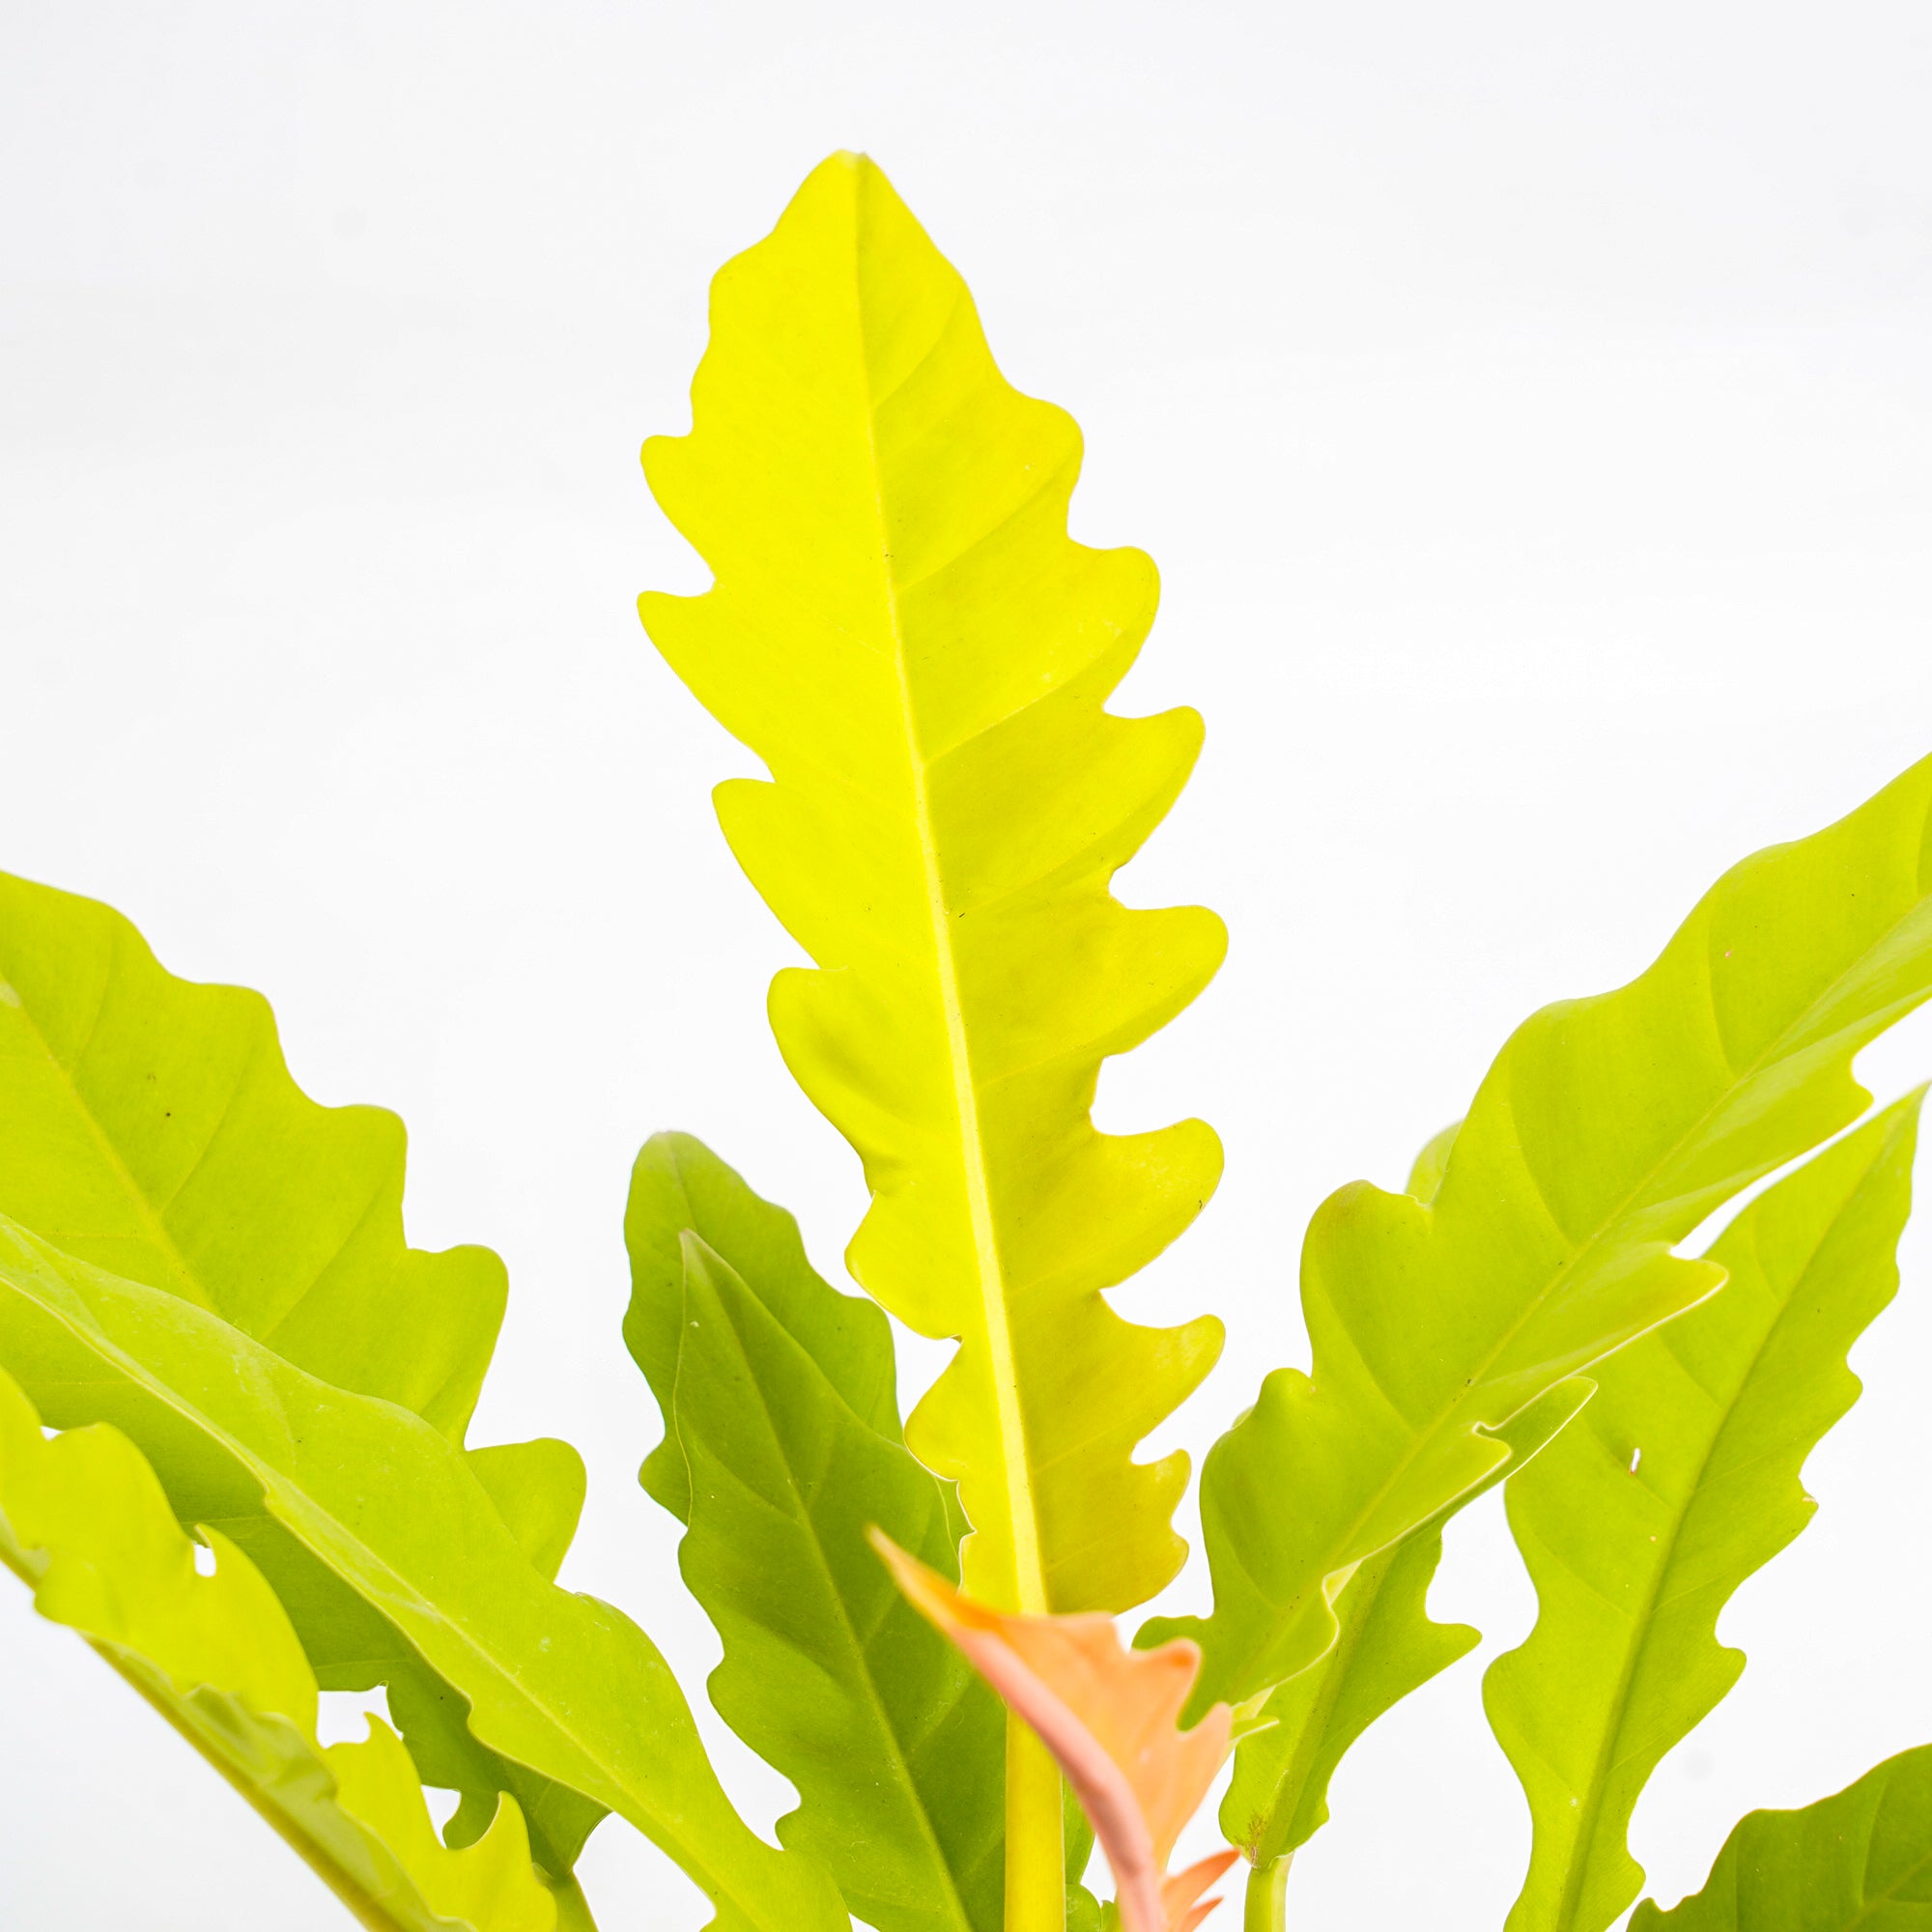 RP327 Philodendron Golden Saw